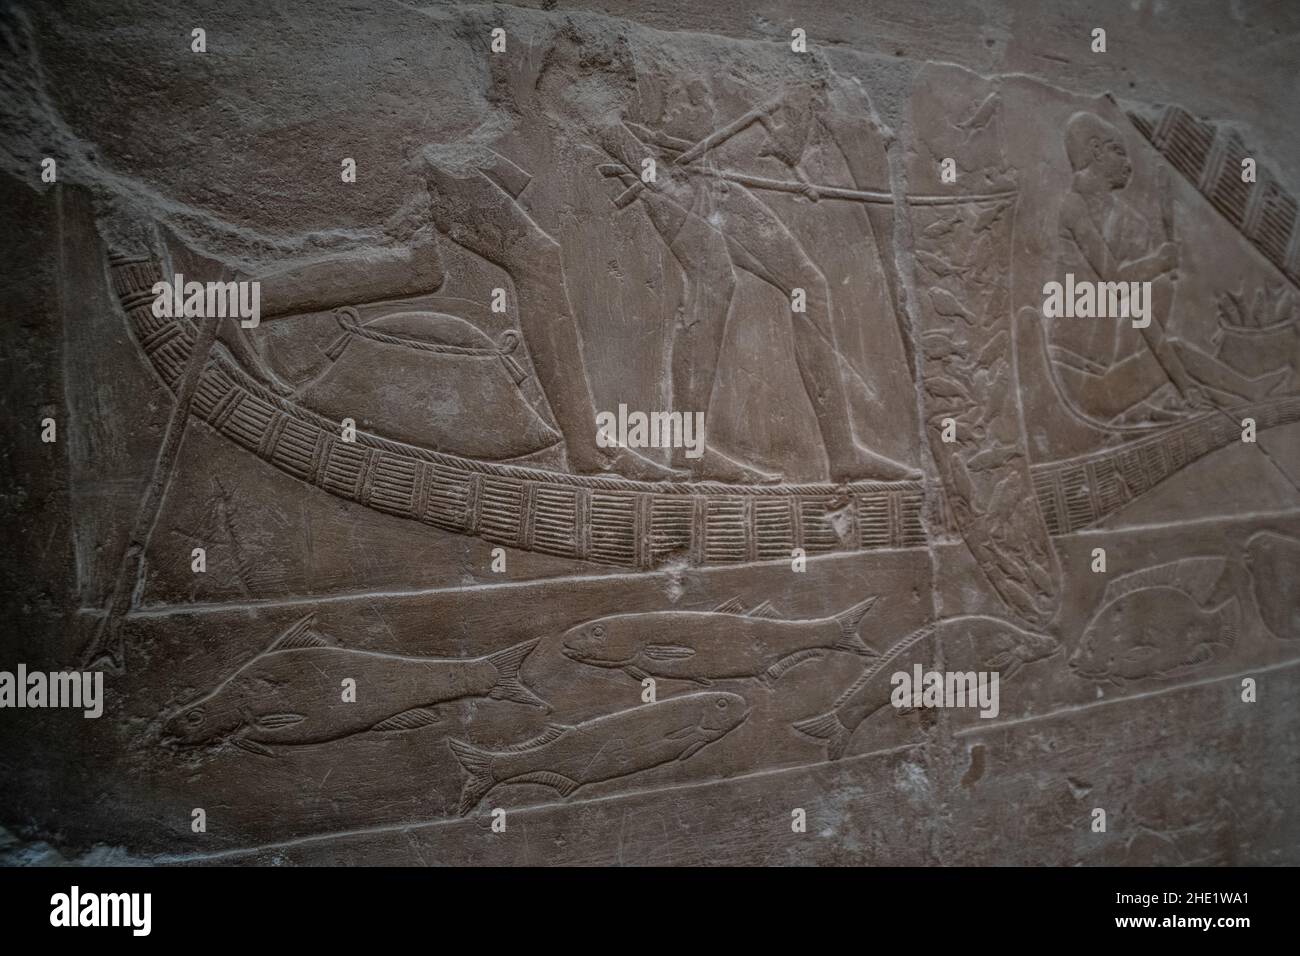 An ancient stone relief sculpture at the Saqqara necropolis in Egypt depicting a boat and fish in the Nile river. Stock Photo